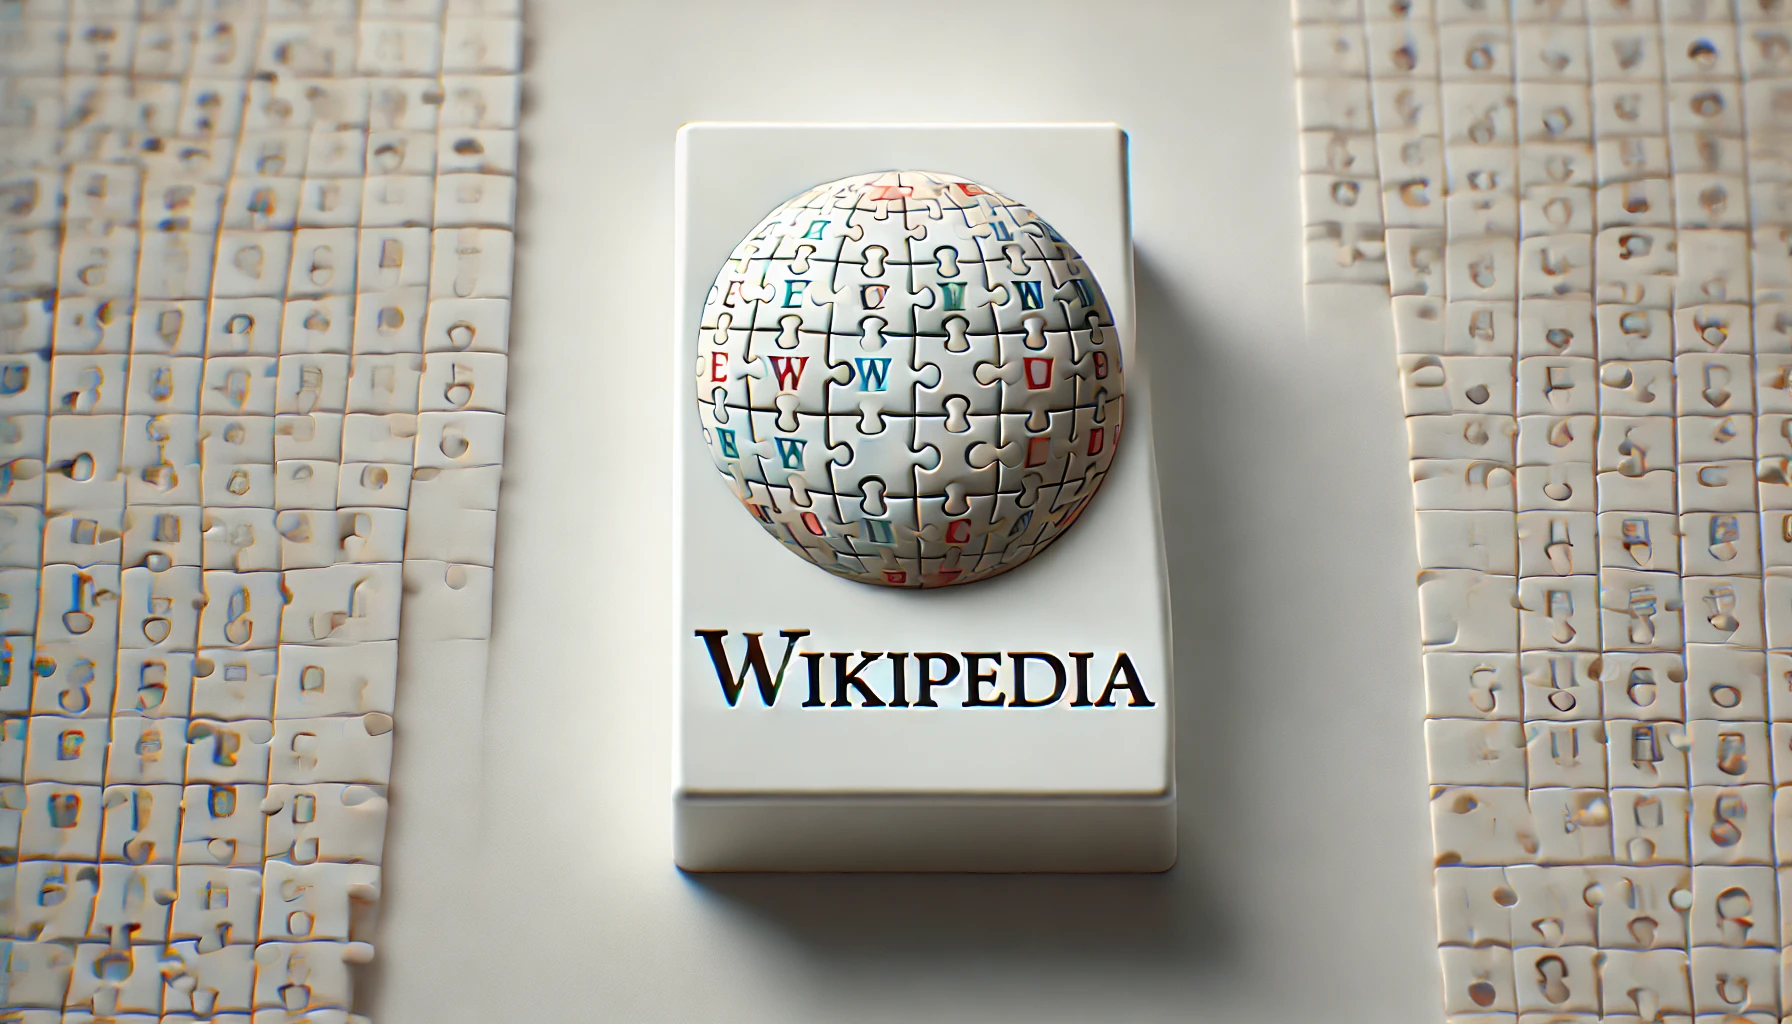 What if you tried to print Wikipedia?